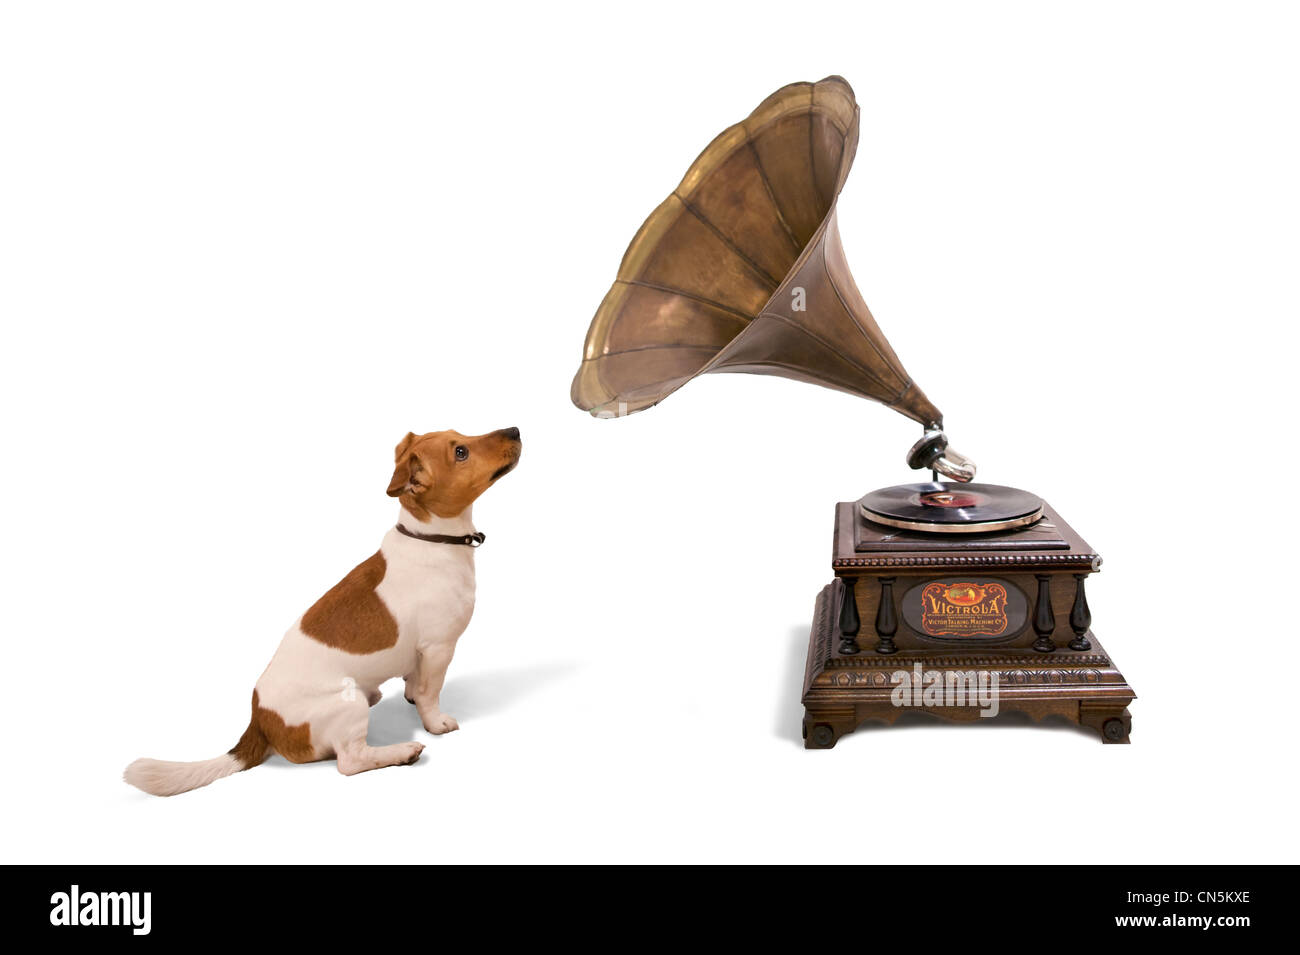 Vintage gramophone with dog, victor Stock Photo